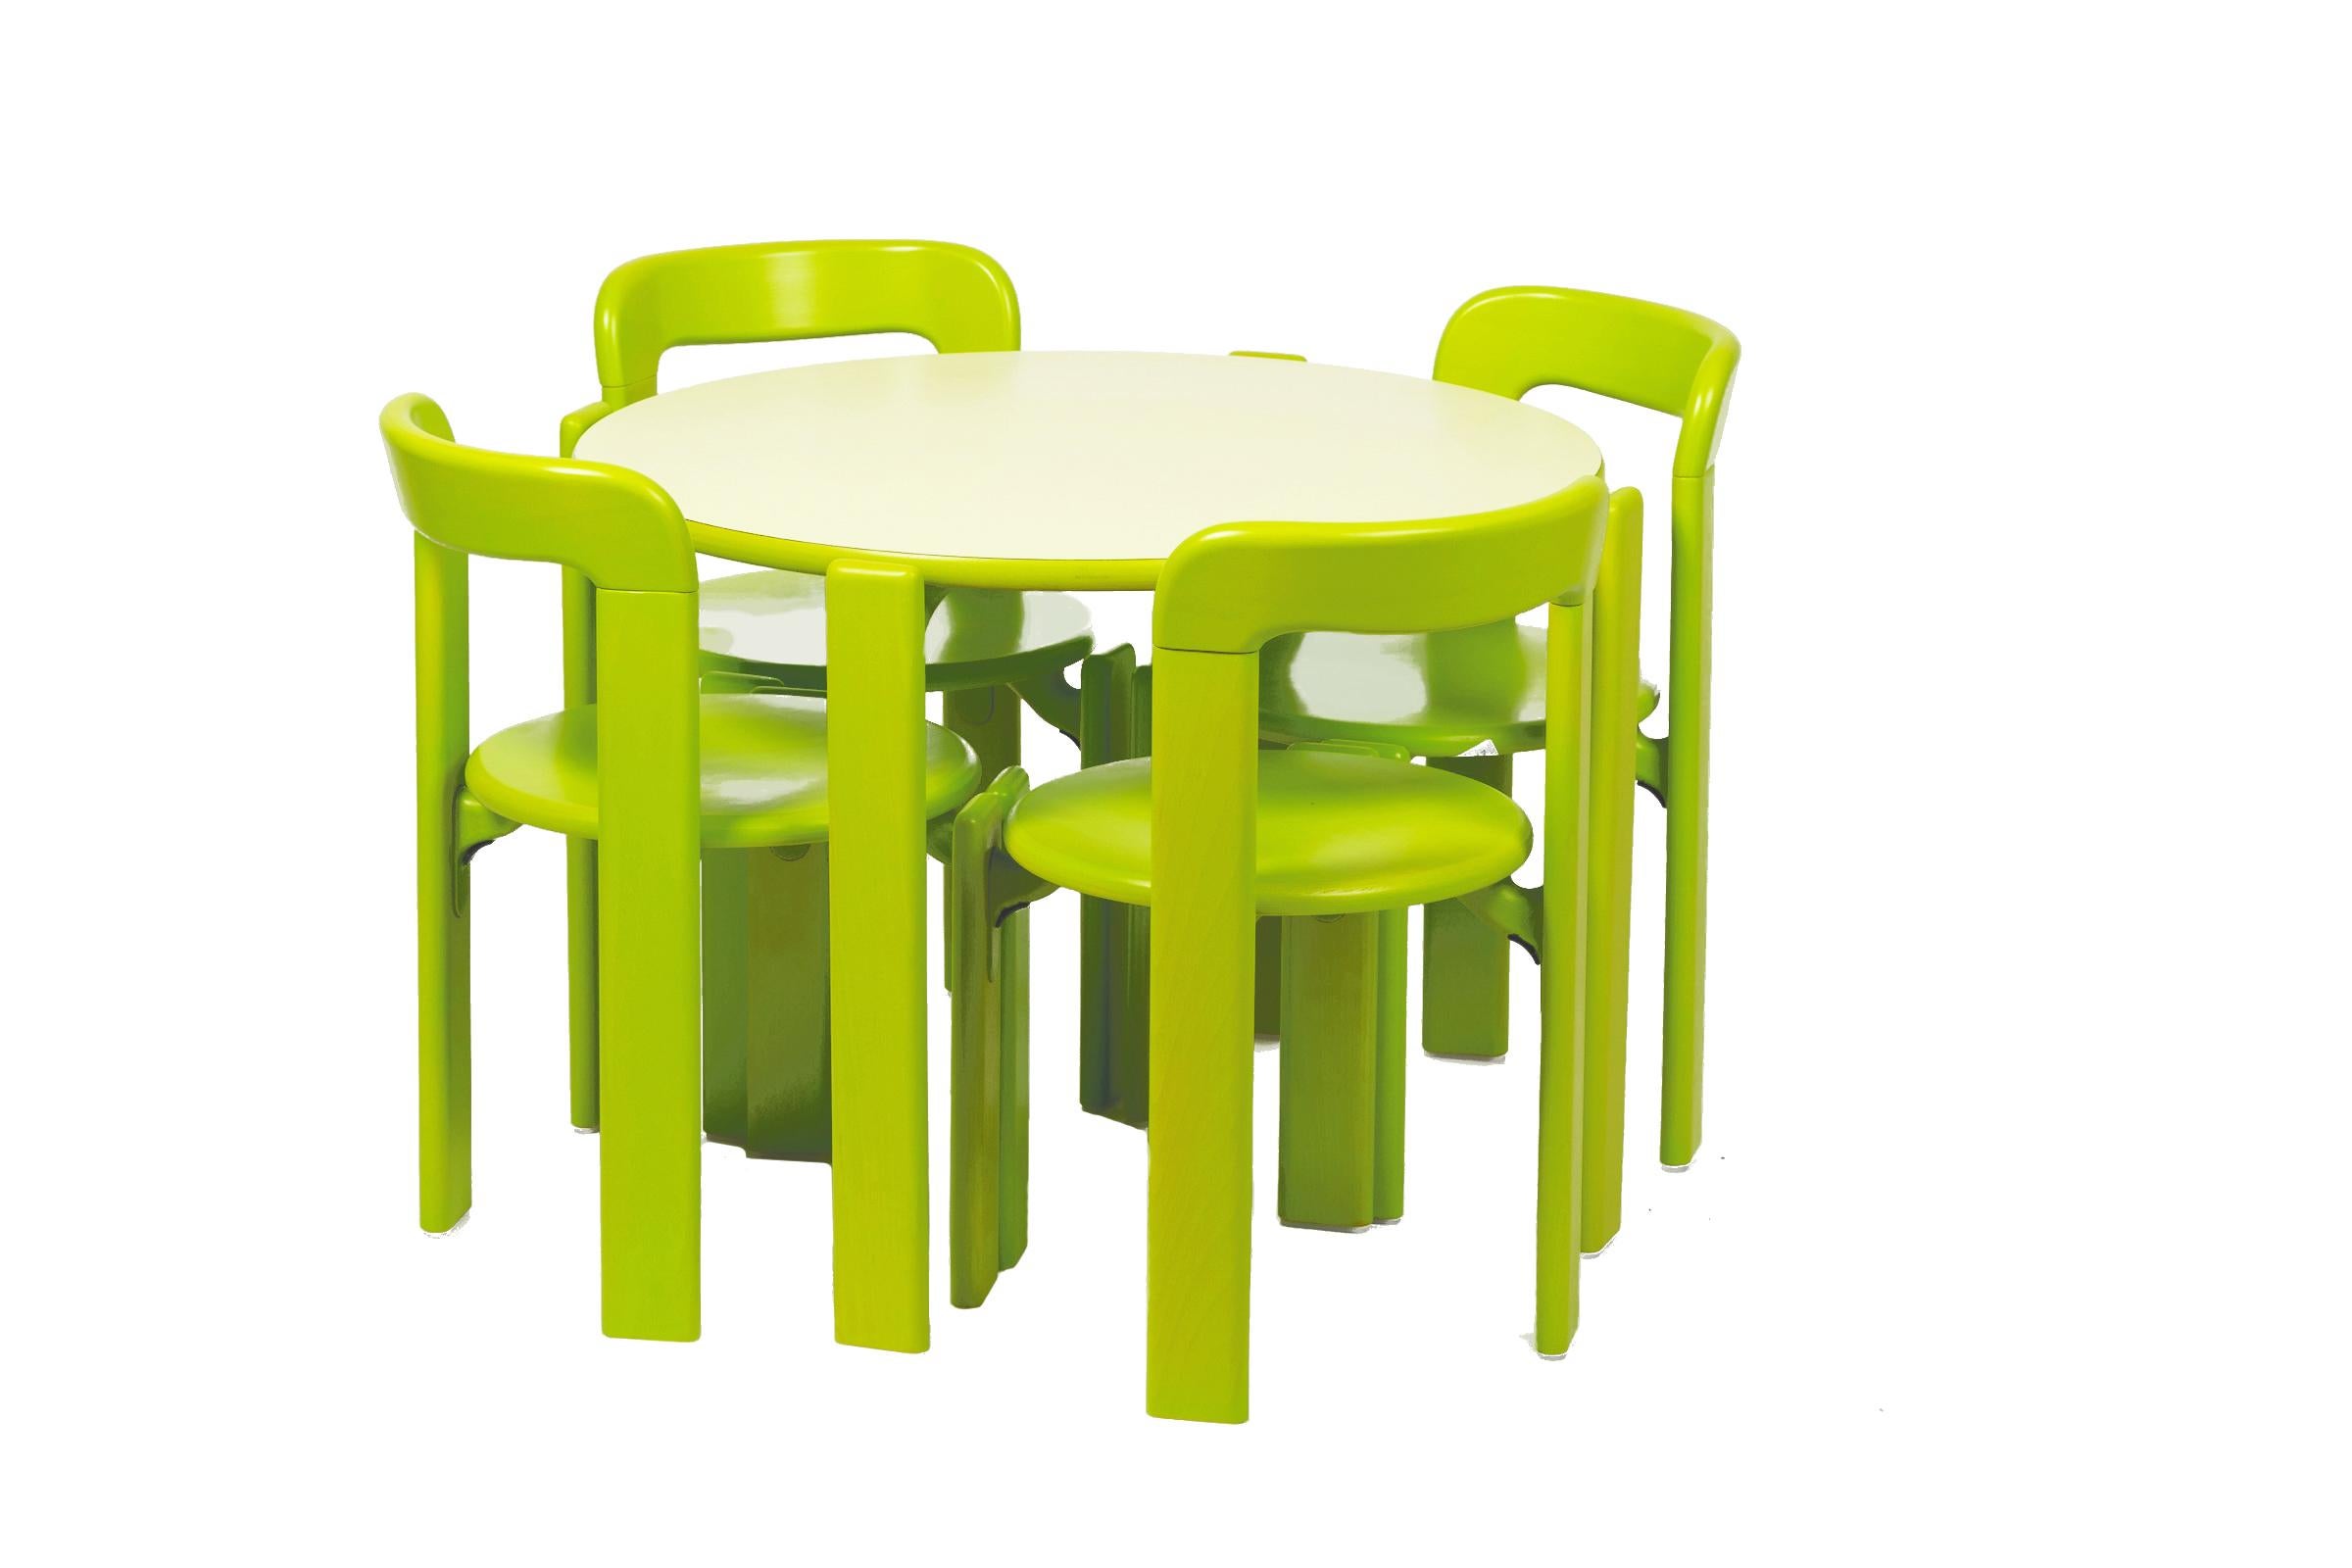 This is the children table version of the famous Rey chair that was designed in 1971.

Designed by Bruno Rey, the Rey chair is famed internationally for its elegance and style. Like the original, the Junior edition table is constructed with